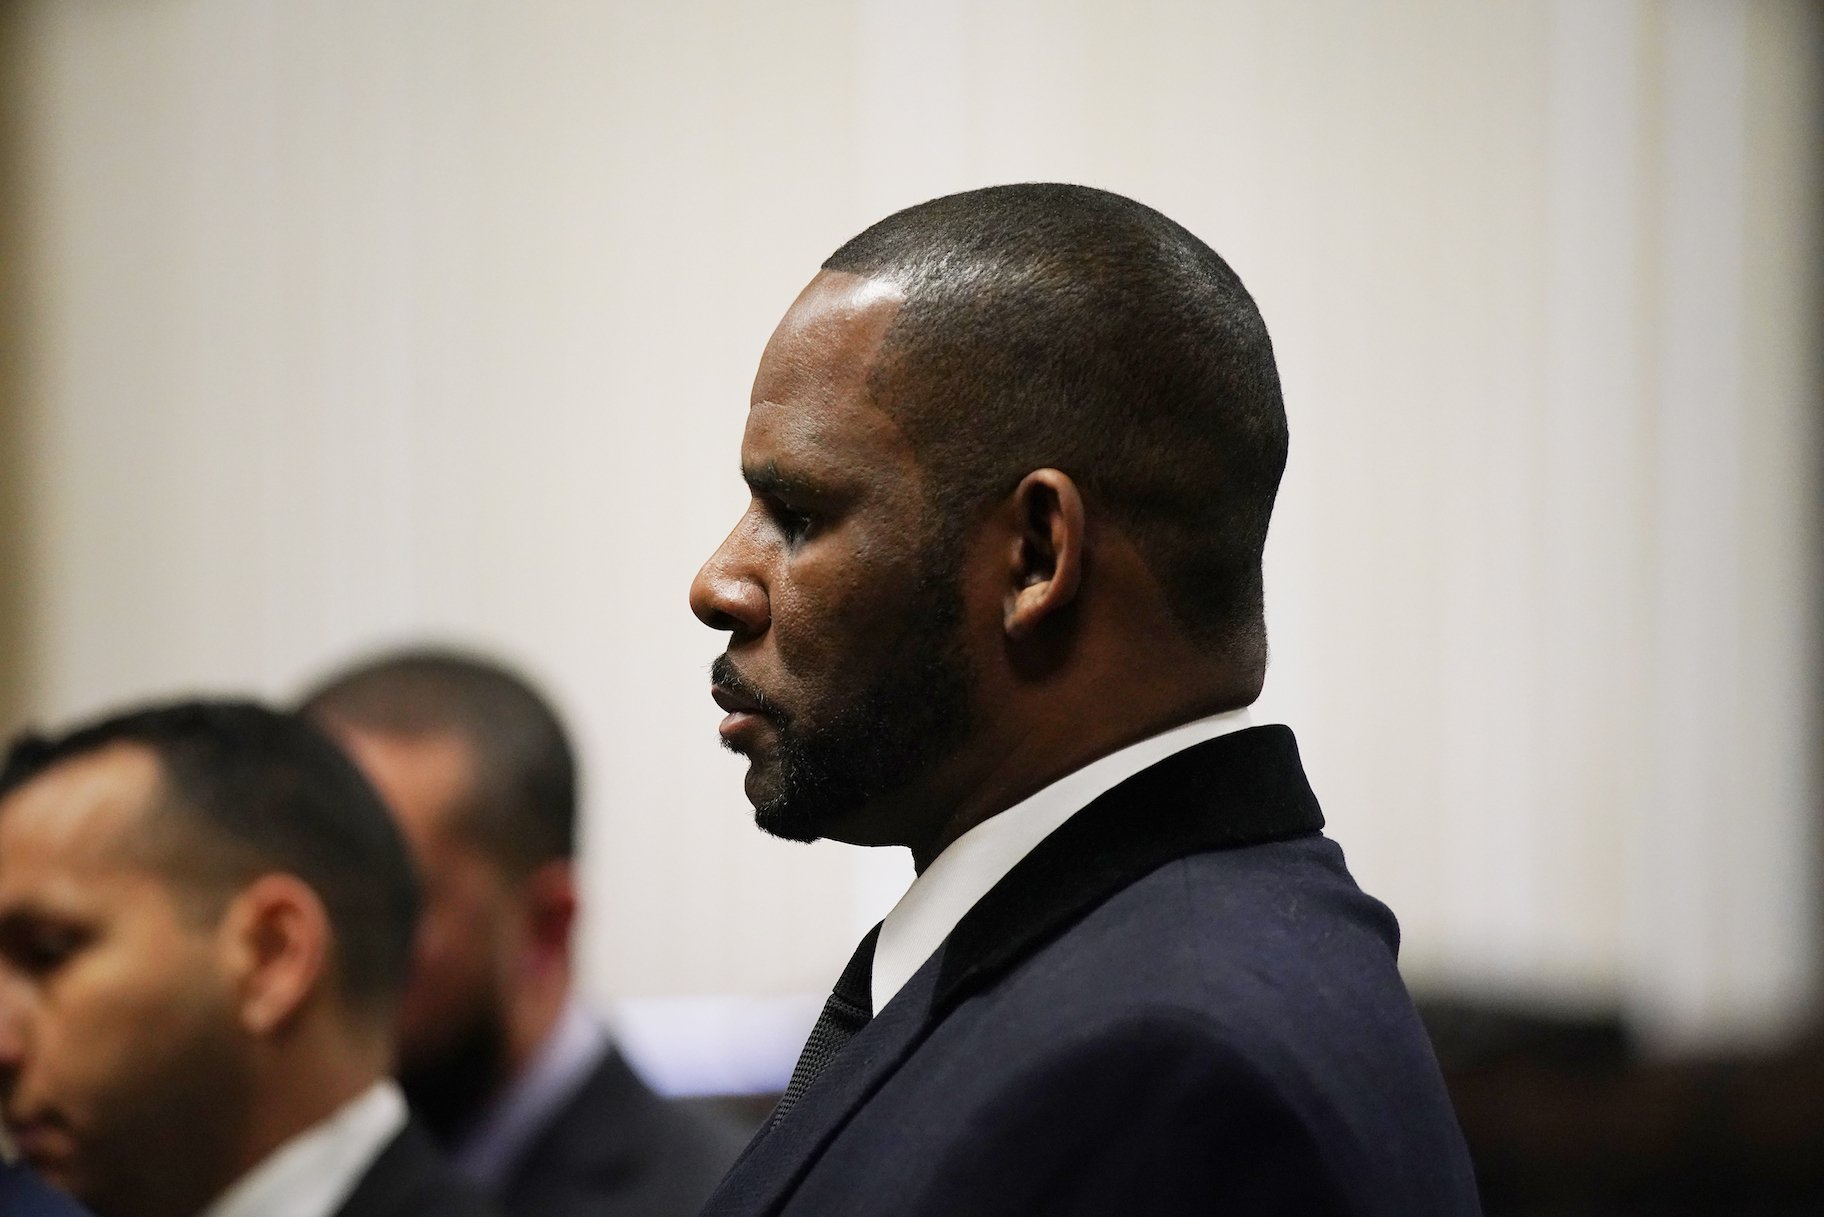 R. Kelly appears at a hearing Tuesday, May 7, 2019 before Judge Lawrence Flood at the Leighton Criminal Court Building in Chicago. (E. Jason Wambsgans / Chicago Tribune / Pool)